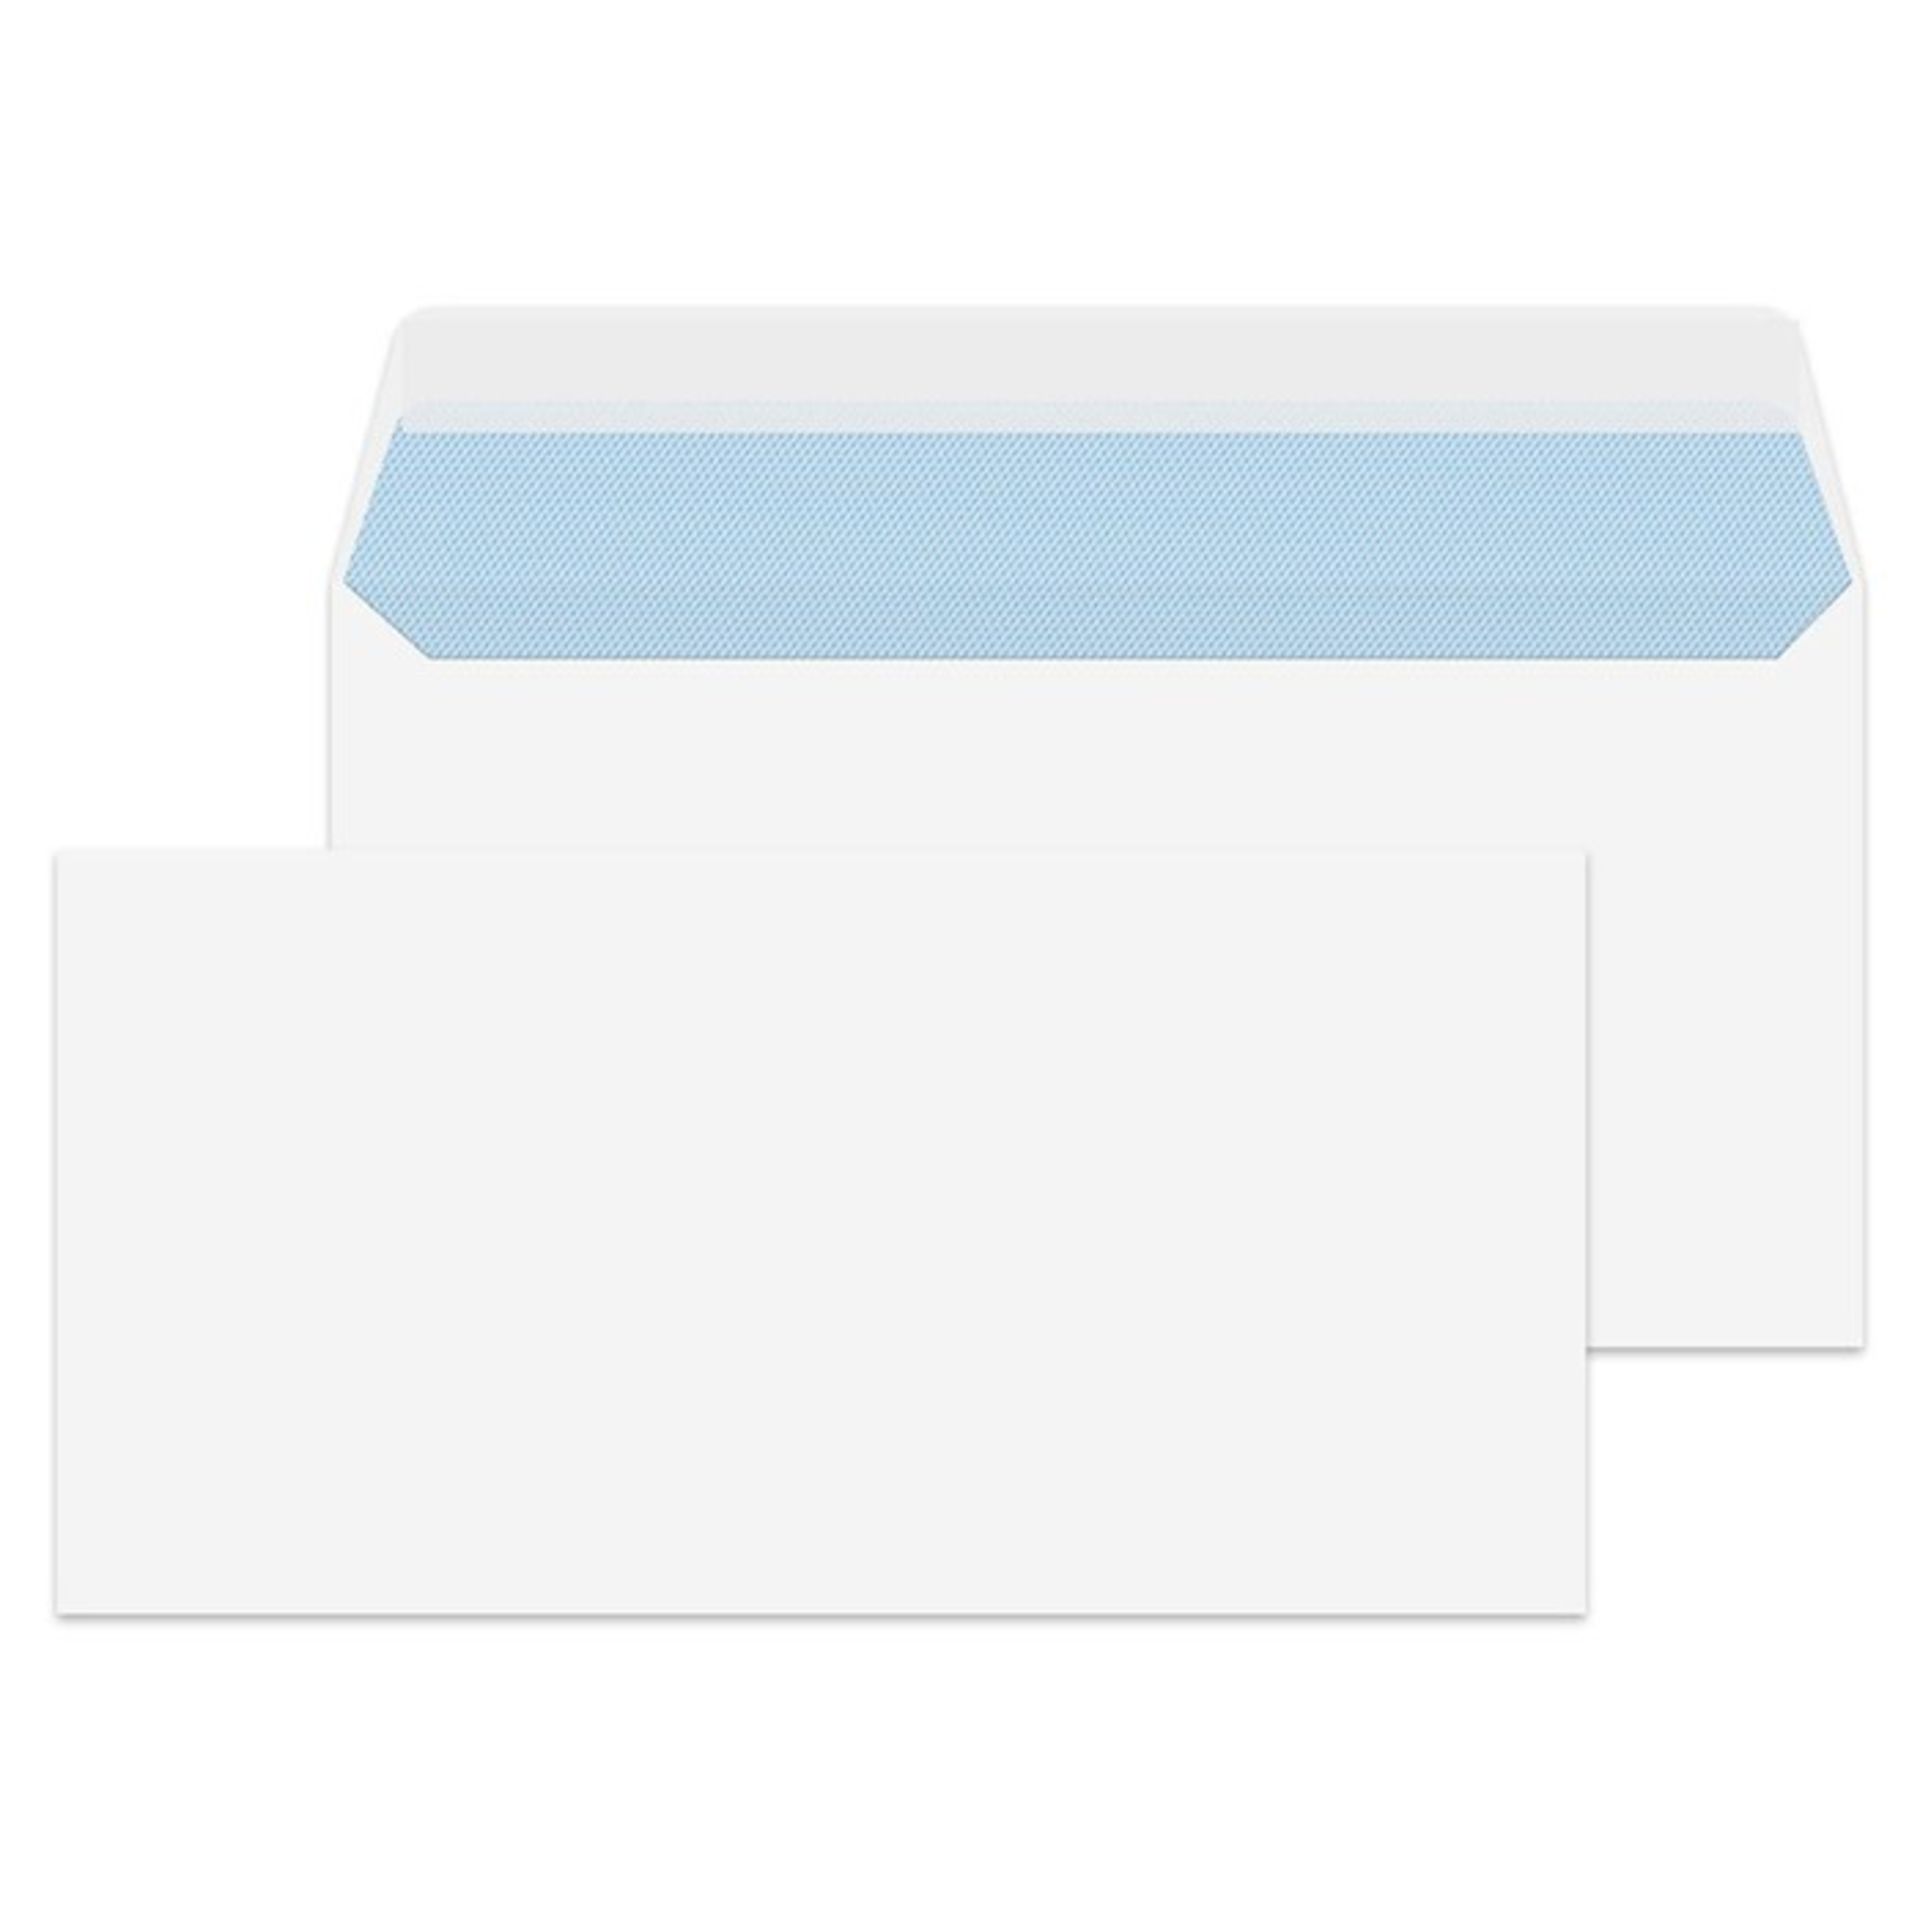 1 BOX OF APPROX 500 DL PREMIUM PEEL AND SEAL WHITE ENVELOPES, P/N (VIEWING HIGHLY RECOMMENDED)